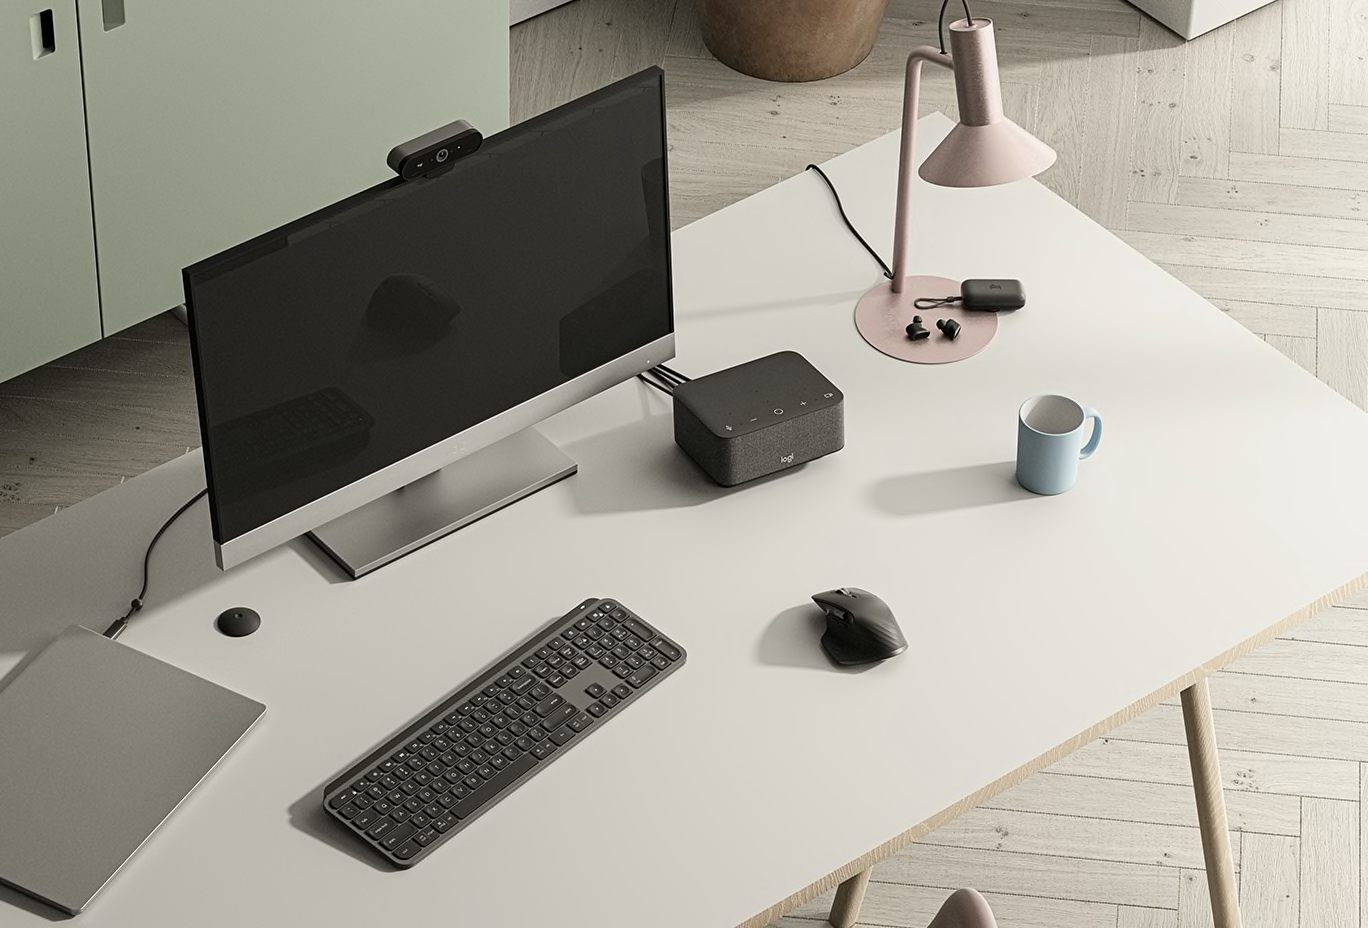 A variety of Logitech peripheral offering desktop solutions with Logi Dock providing a wireless workspace.